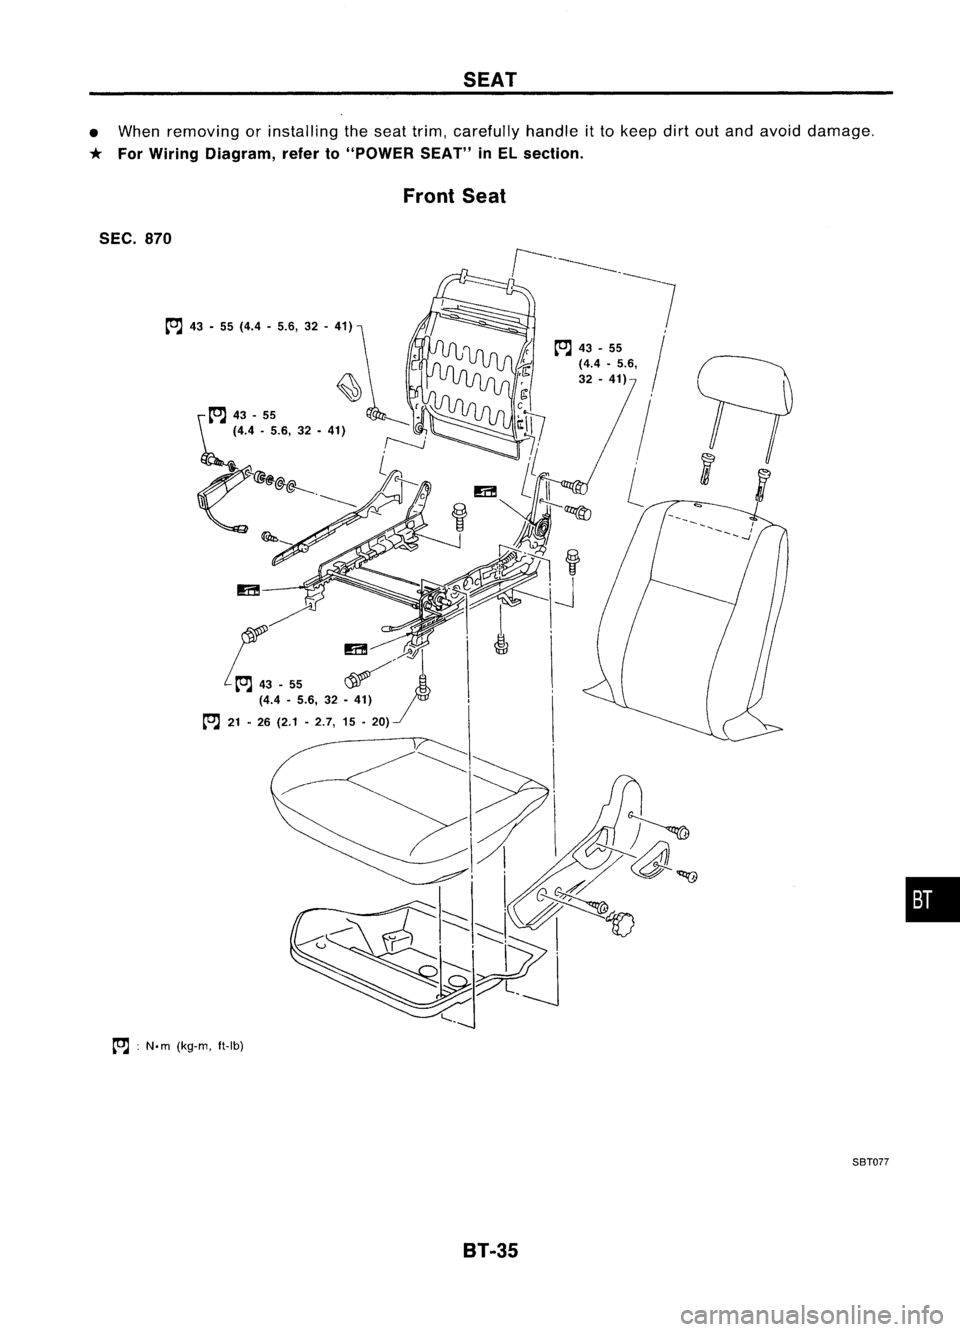 NISSAN ALMERA N15 1995  Service Manual SEAT

• When removing orinstalling theseat trim, carefully handleitto keep dirtoutand avoid damage.

* For Wiring Diagram, referto"POWER SEAT"inEL section.
Front Seat

SEC. 870

l"l 
43�